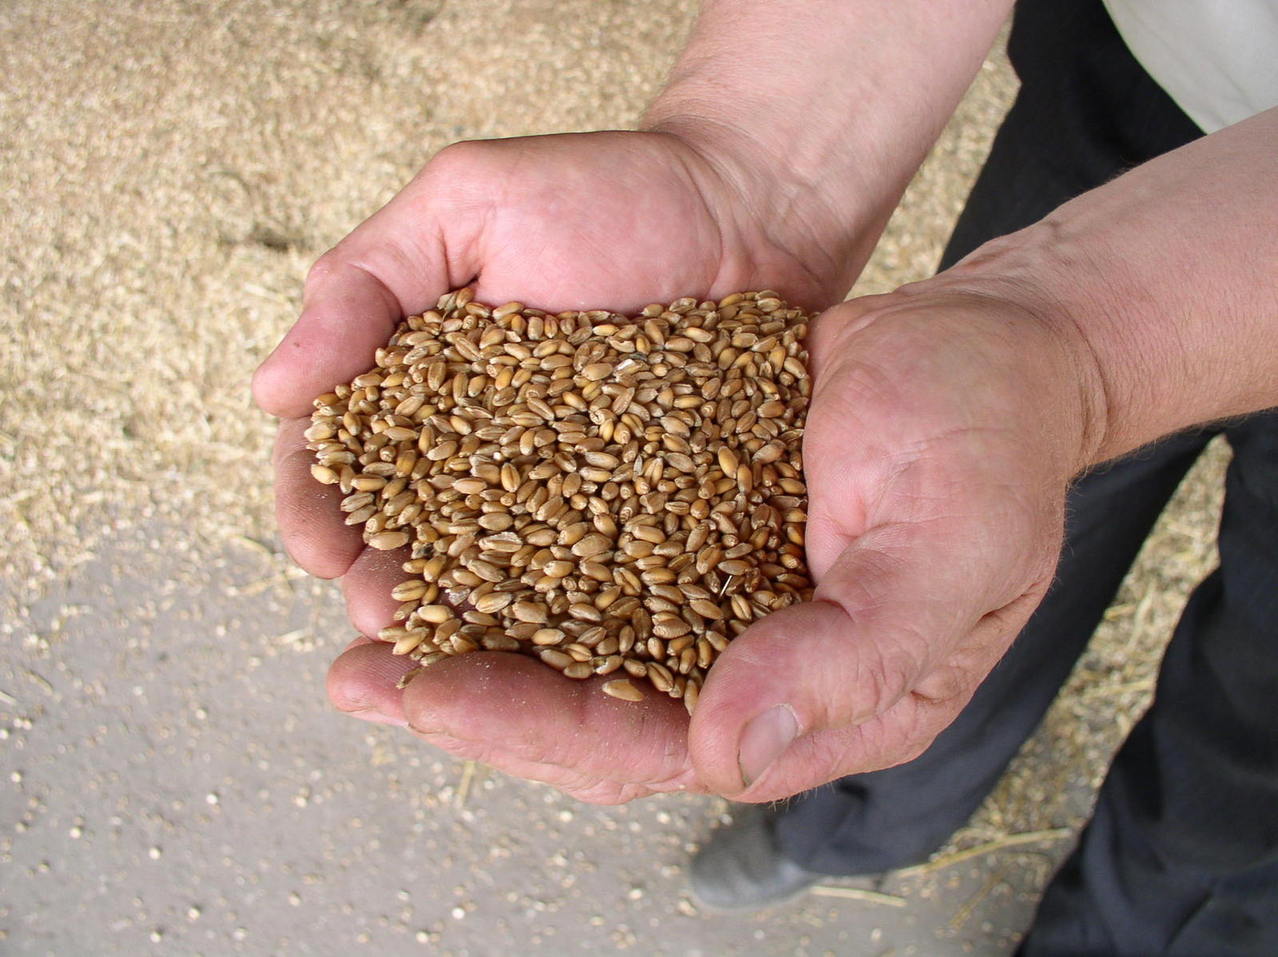 holding wheat grains in hands